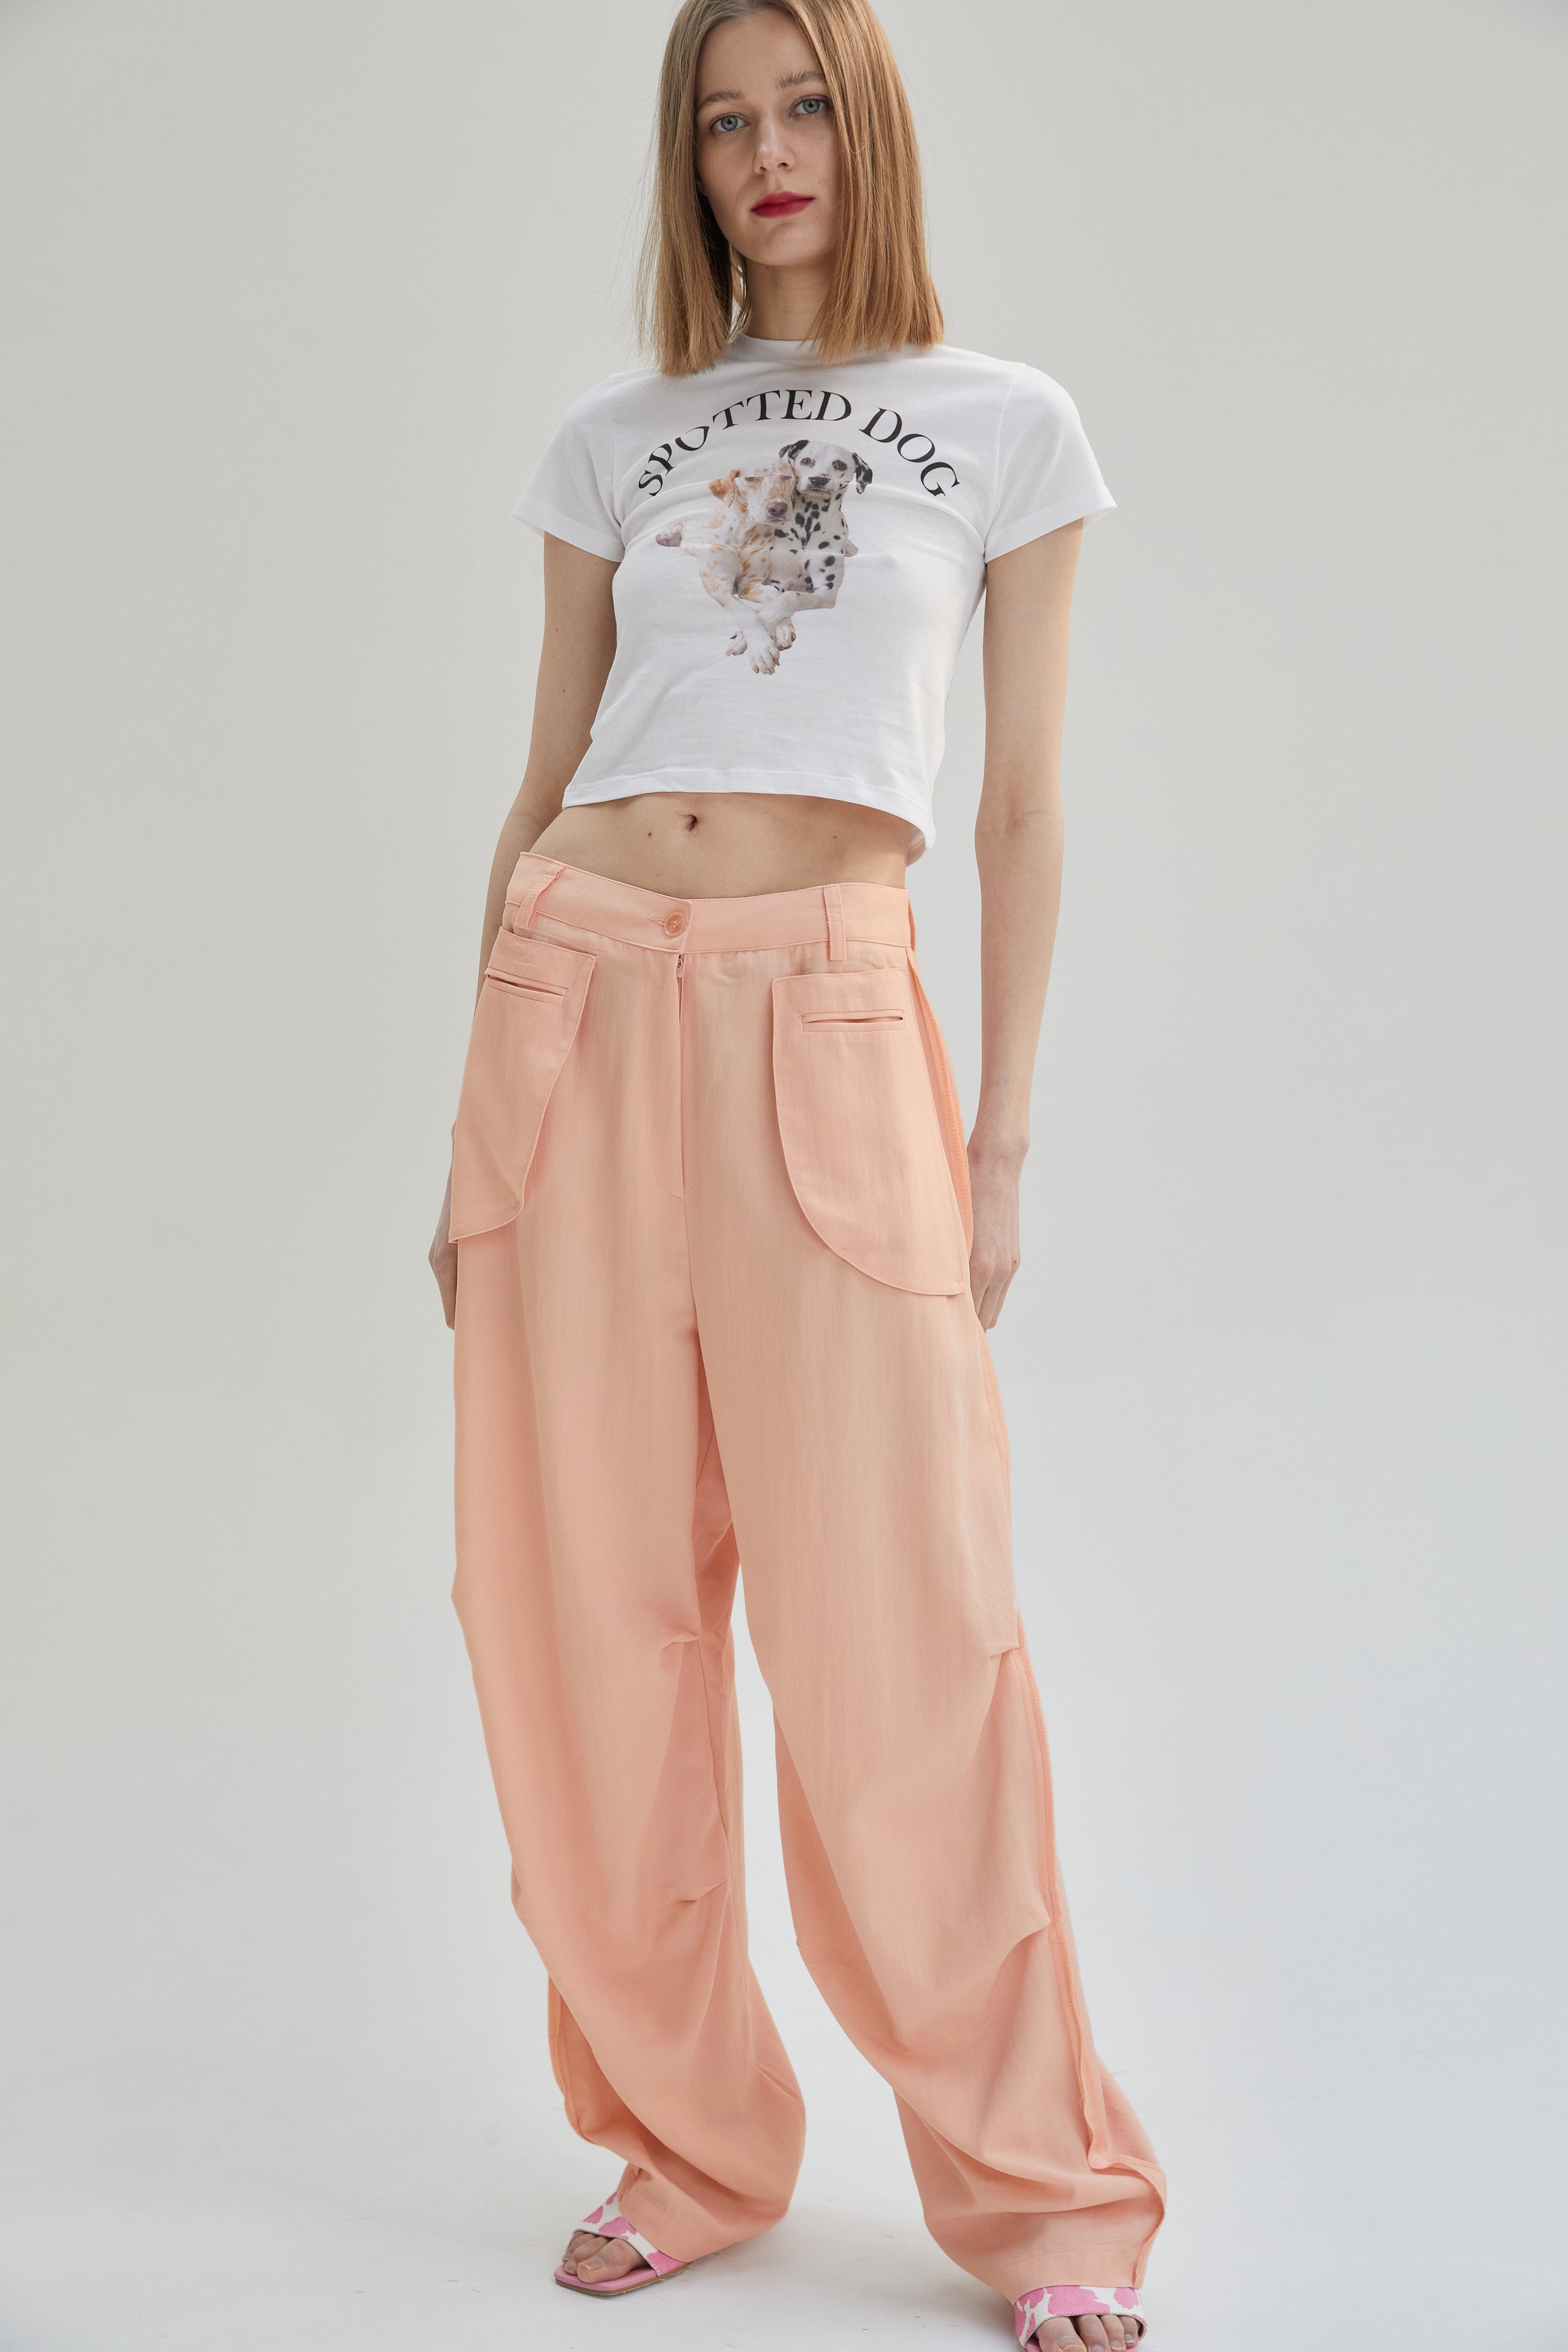 Inside Out Draped Cargo Pants, Salmon Pink